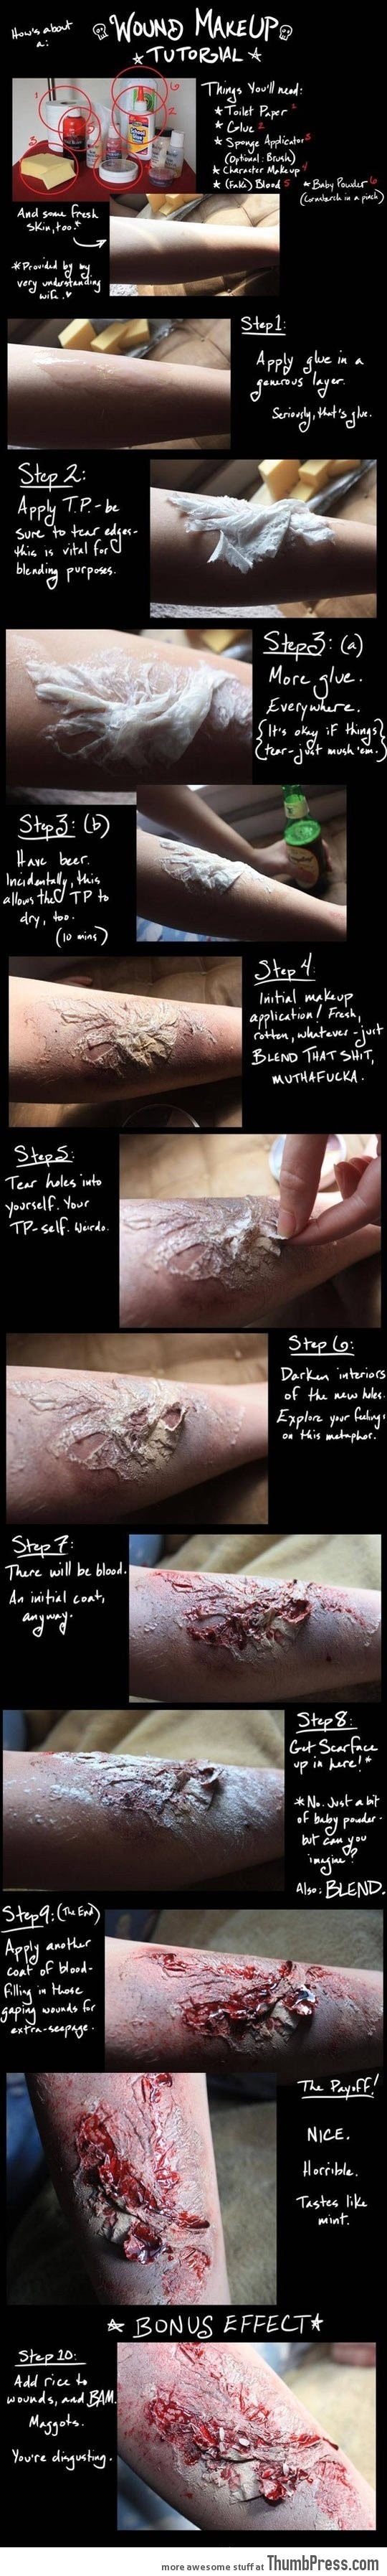 Make up Tutorial - How to make artificial wound